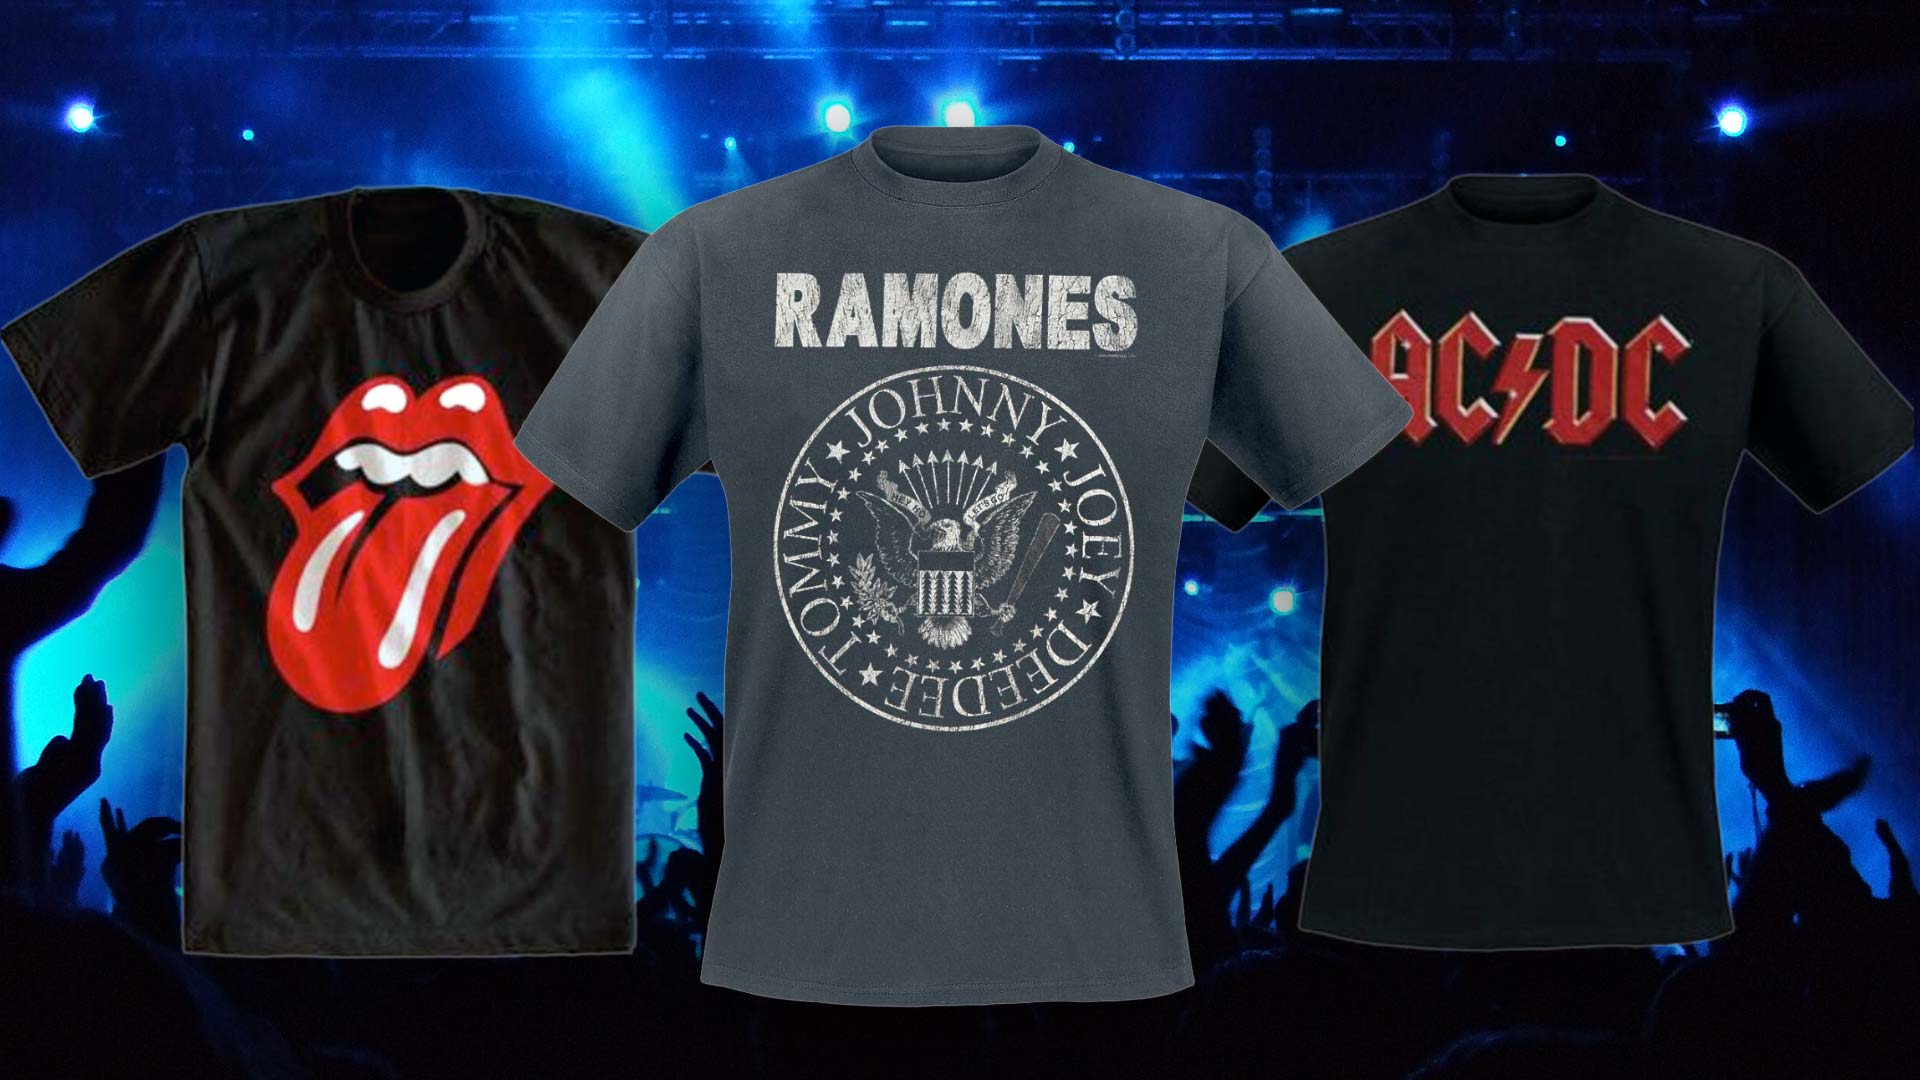 Best Band T Shirts The 25 Coolest Band T Shirts Ever